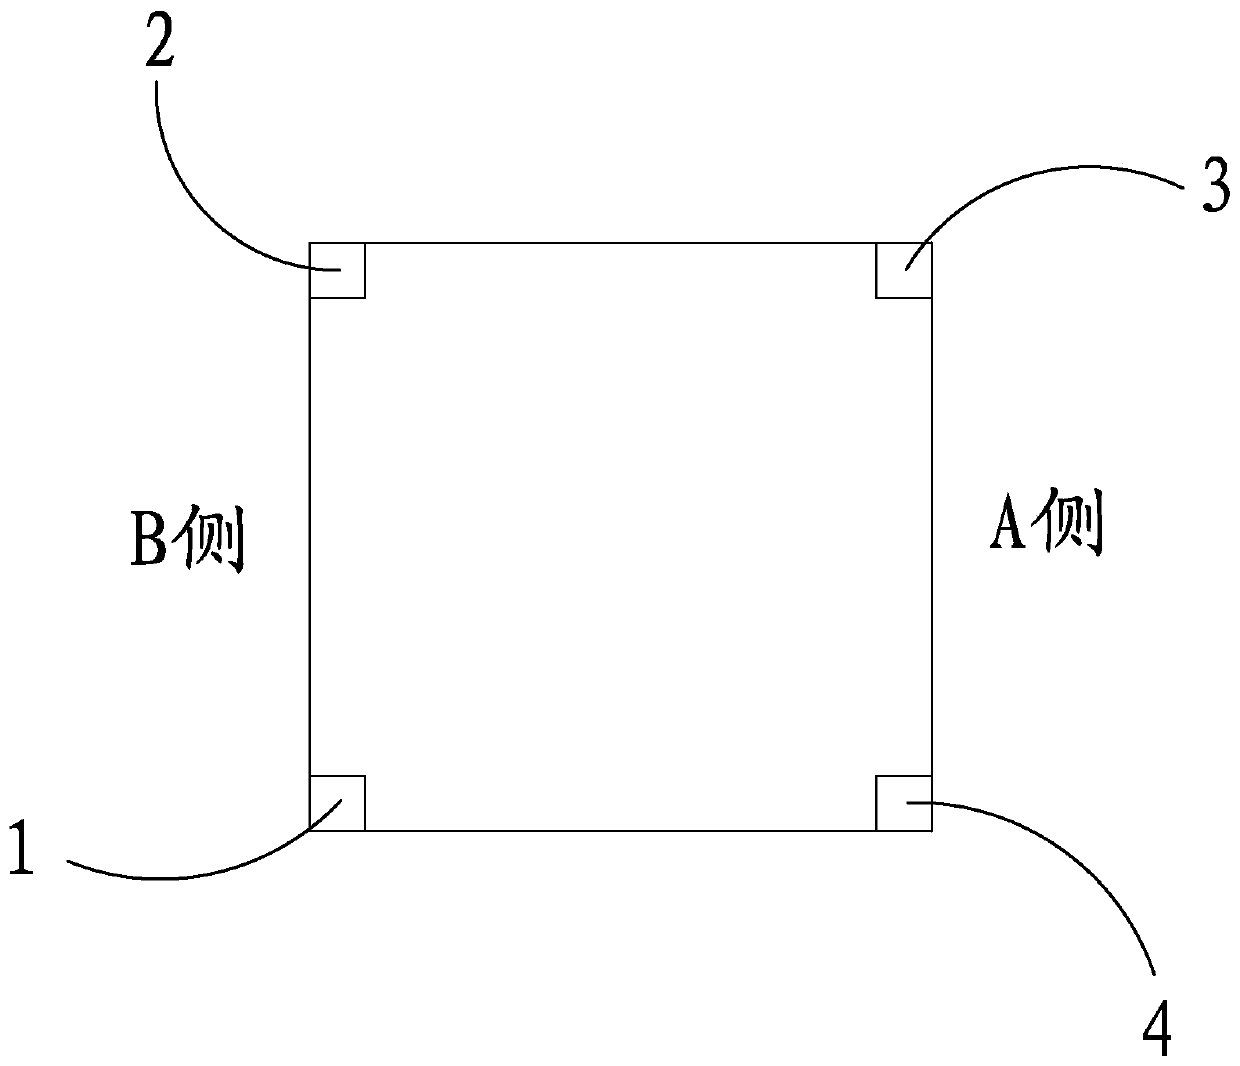 The method of adjusting the deviation of the reheat steam temperature on both sides of the four-corner tangentially fired boiler with the sofa damper